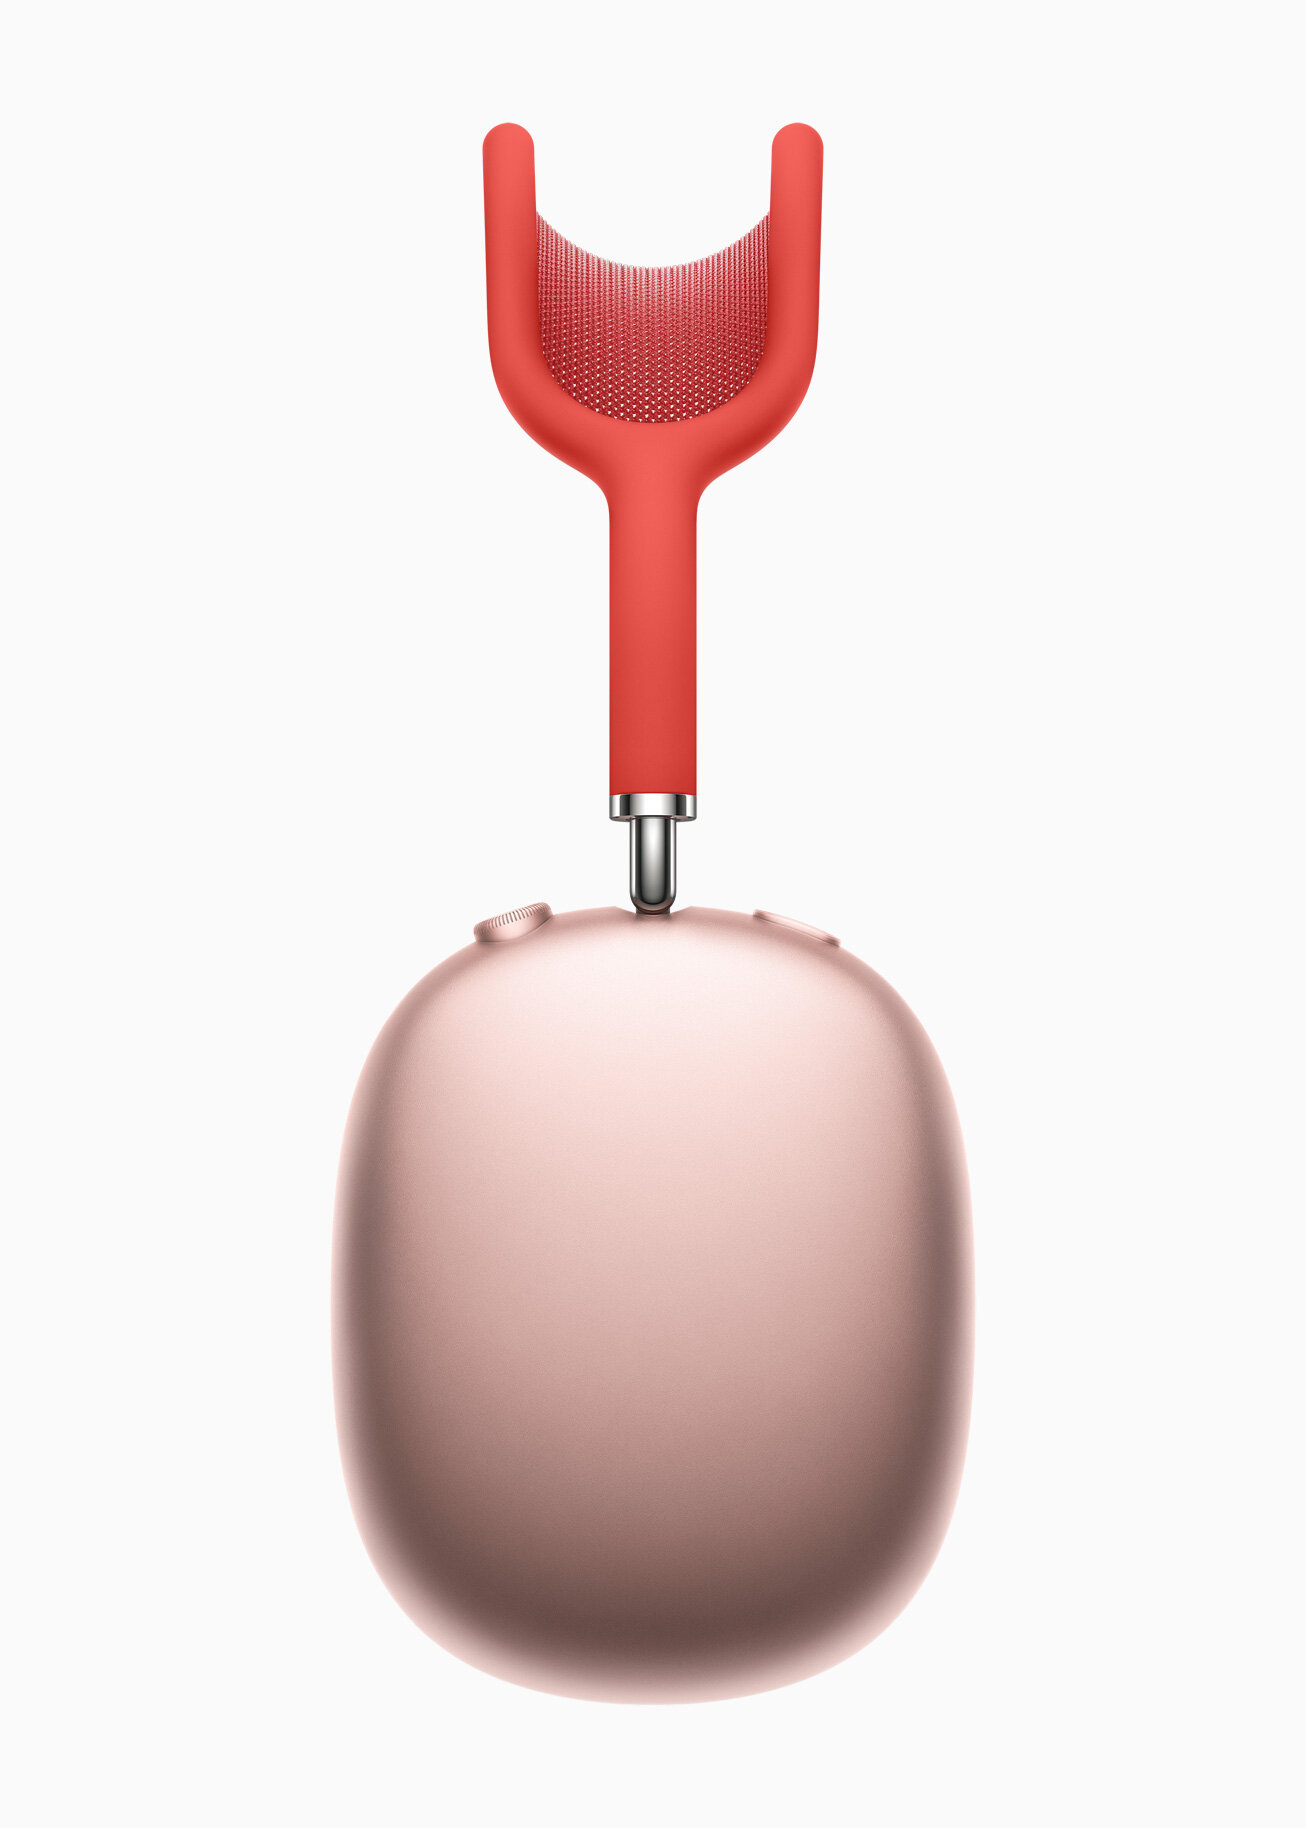 apple_airpods-max_color-red_12082020_carousel.jpg.large_2x.jpg